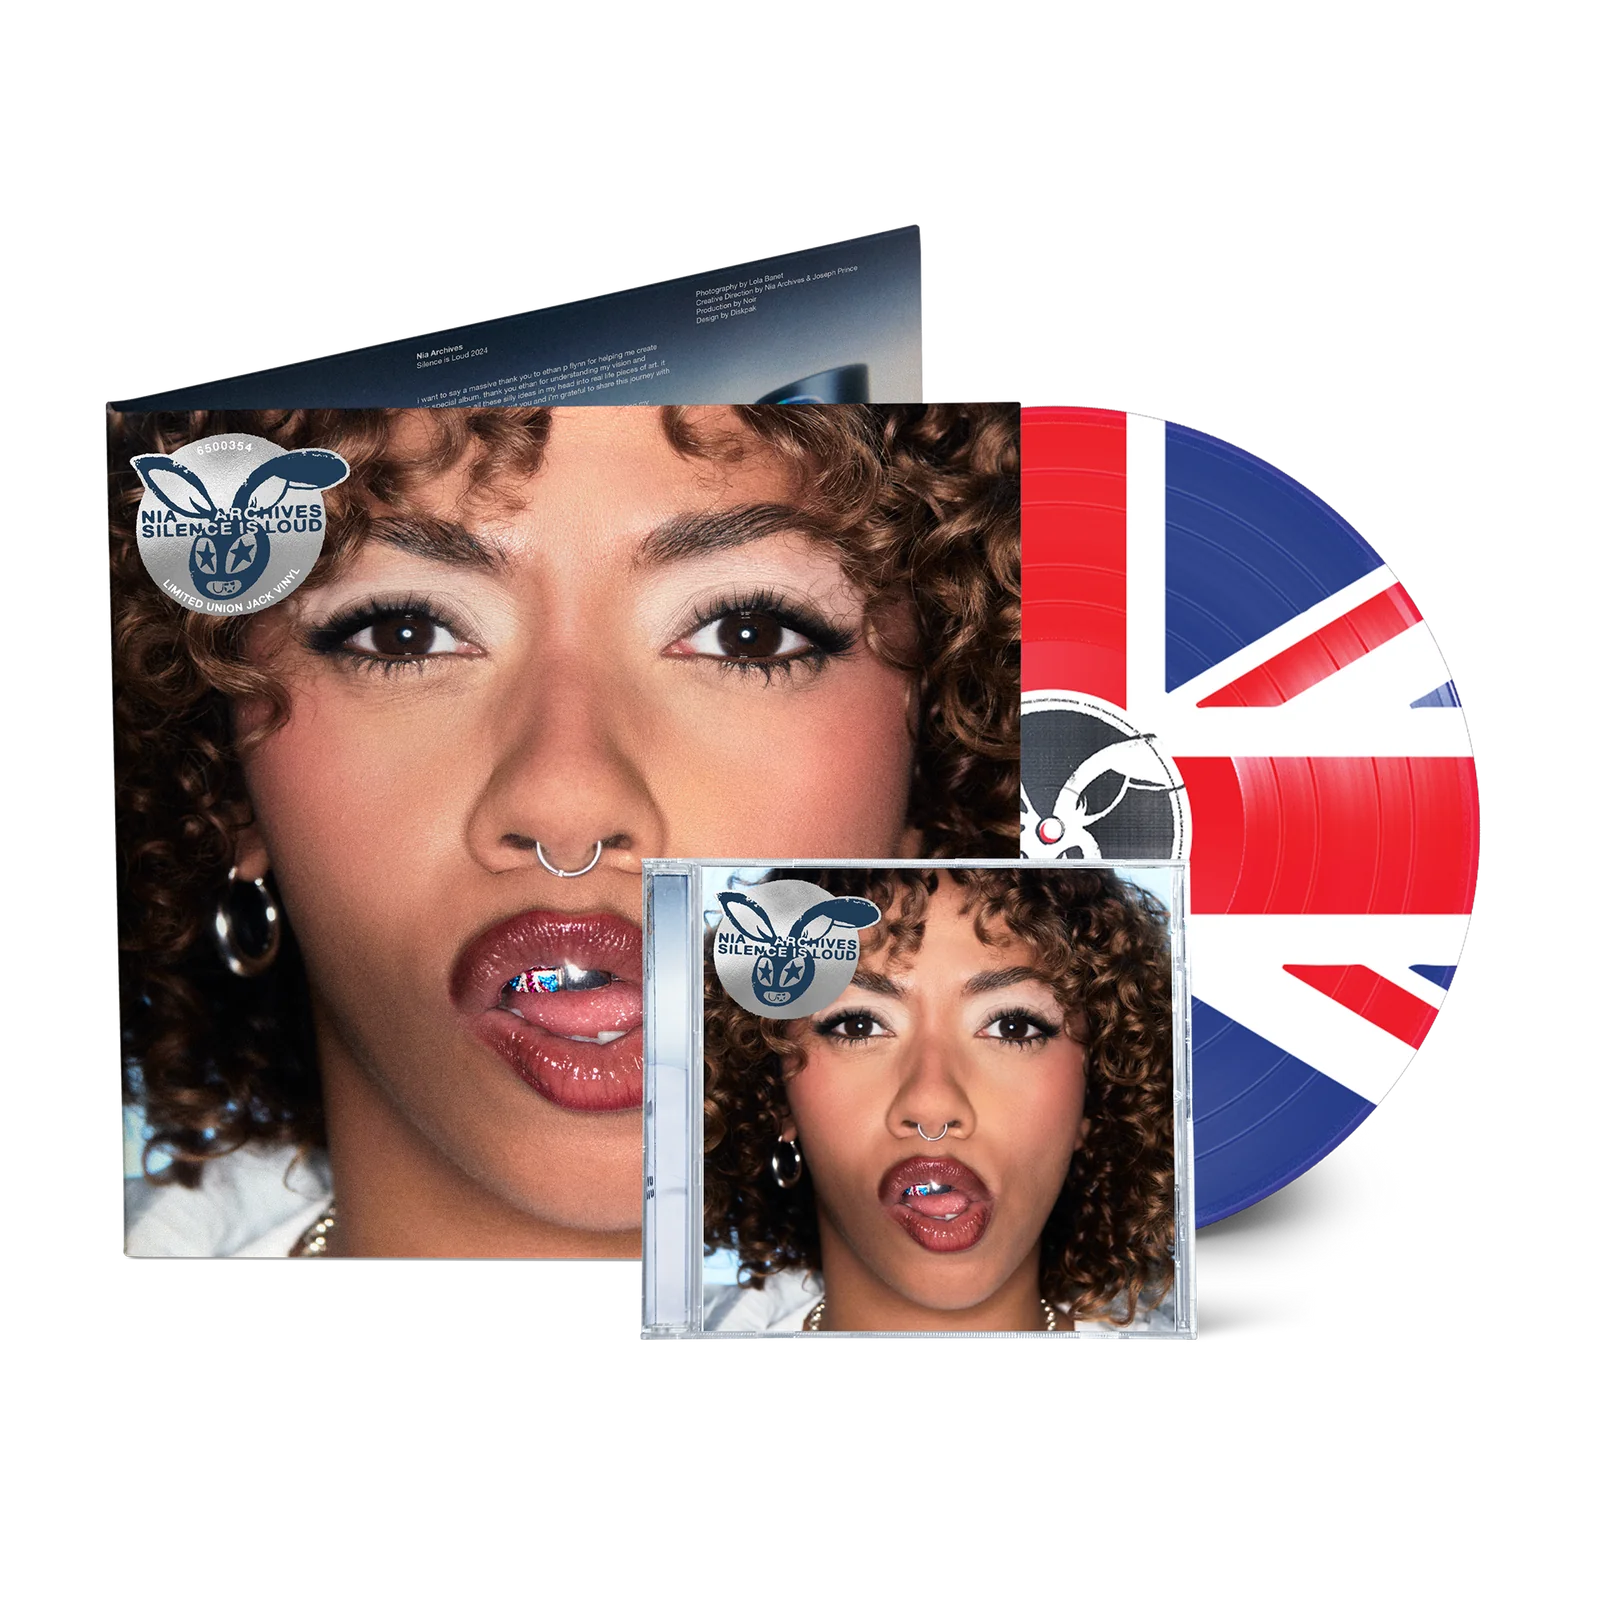 Silence Is Loud: Limited 'Union Jack' Vinyl LP (w/ Signed Insert) + CD